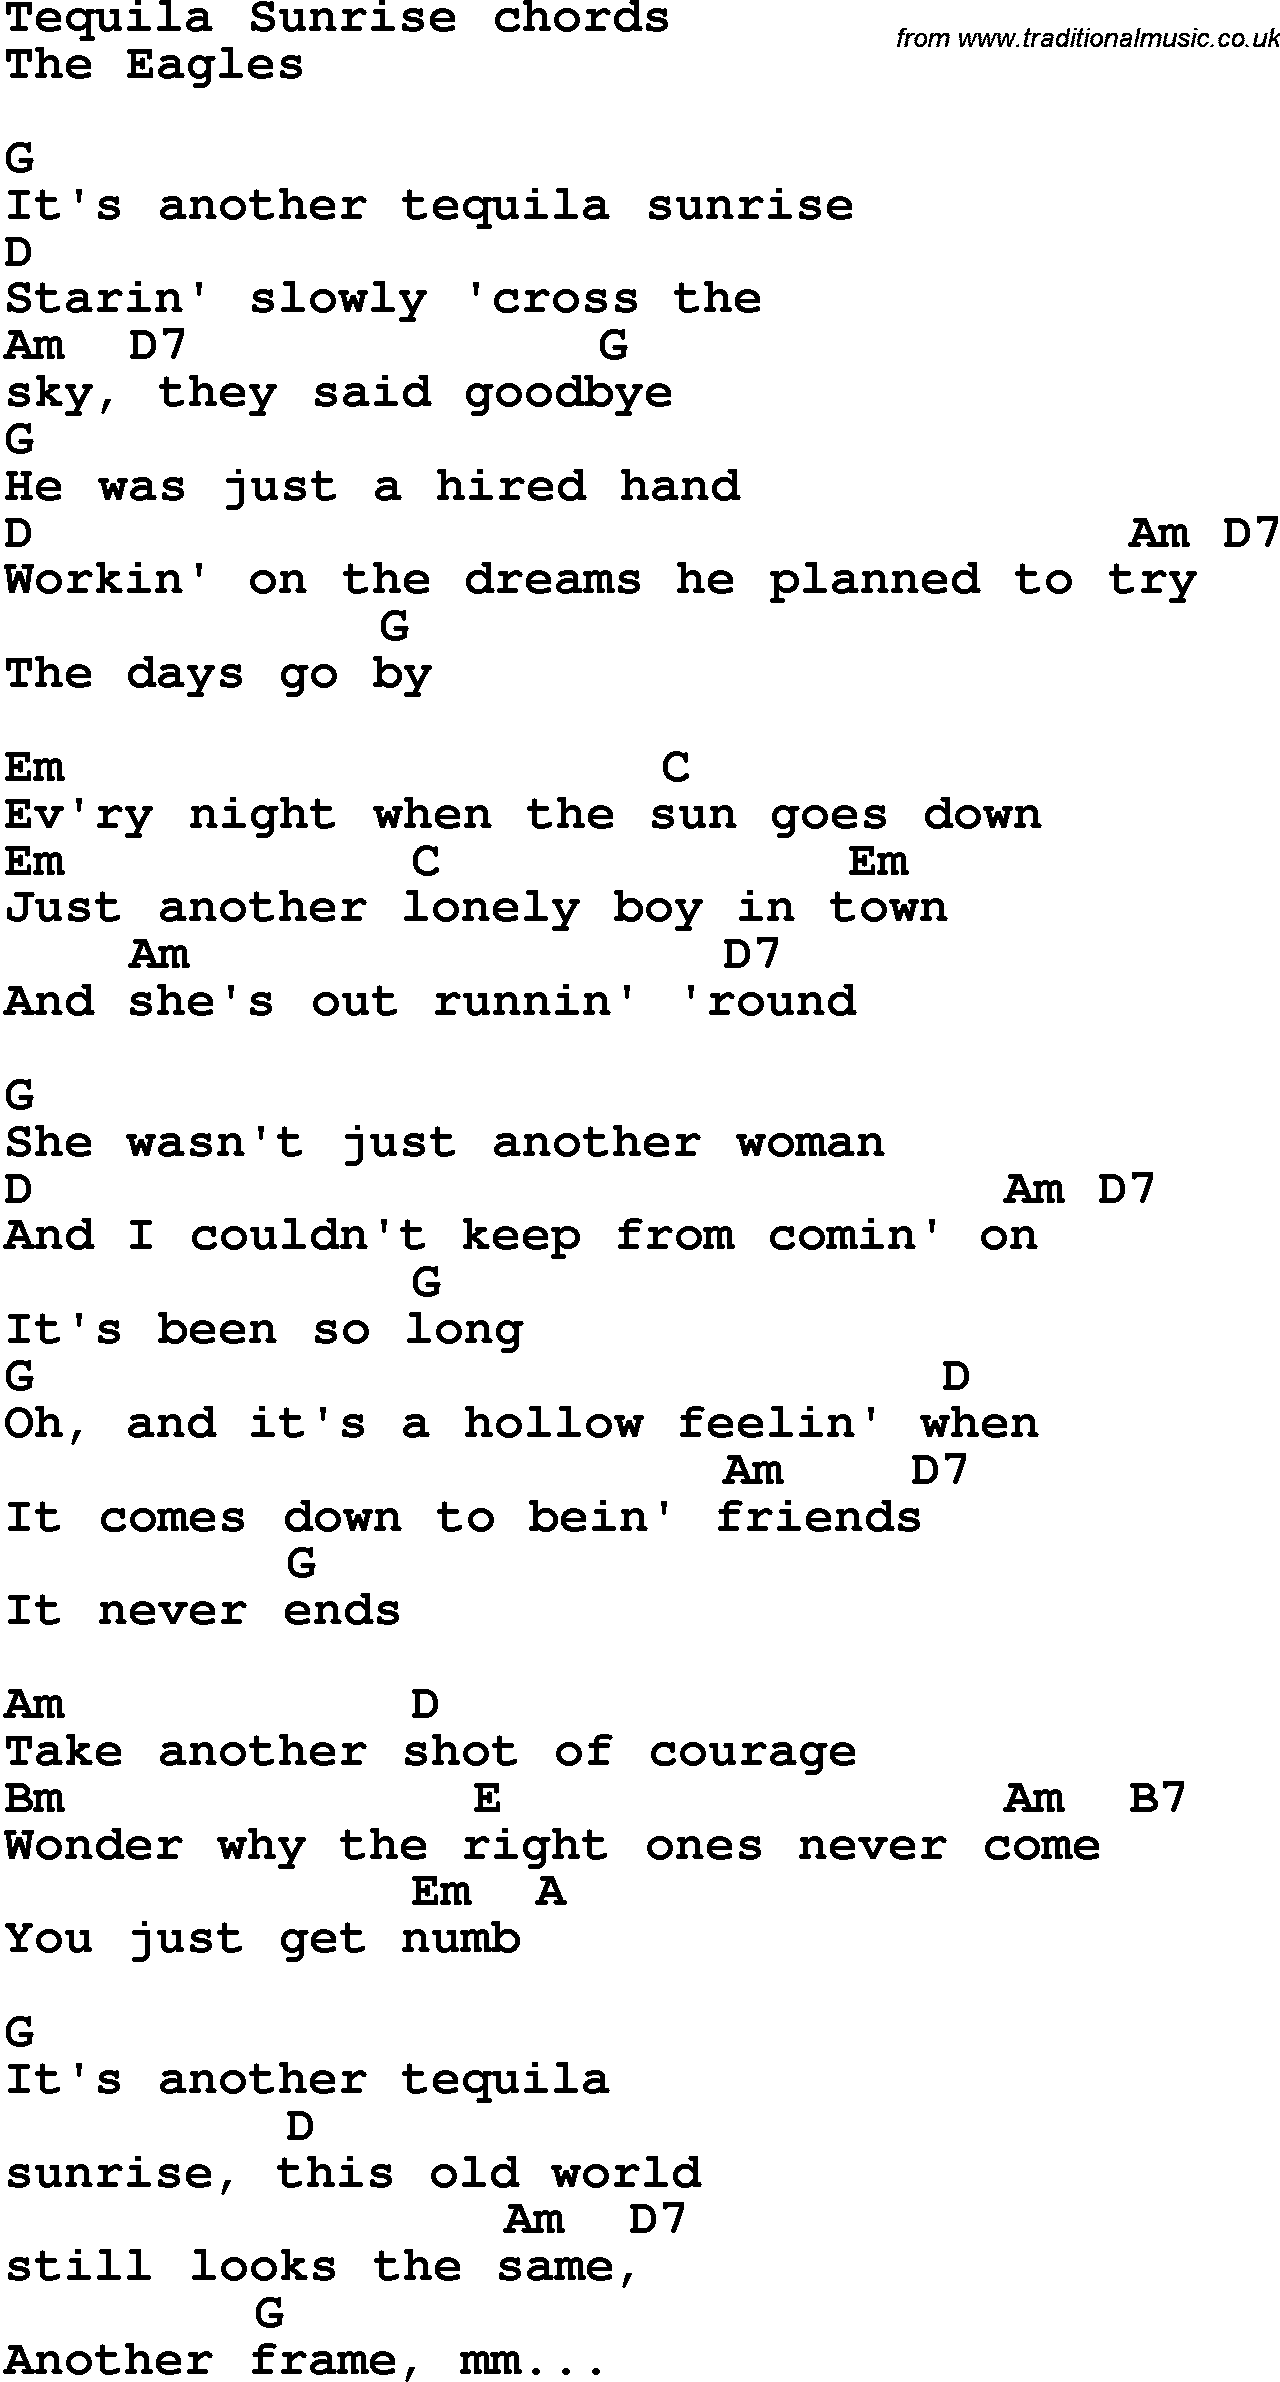 Song Lyrics with guitar chords for Tequila Sunrise - The Eagles